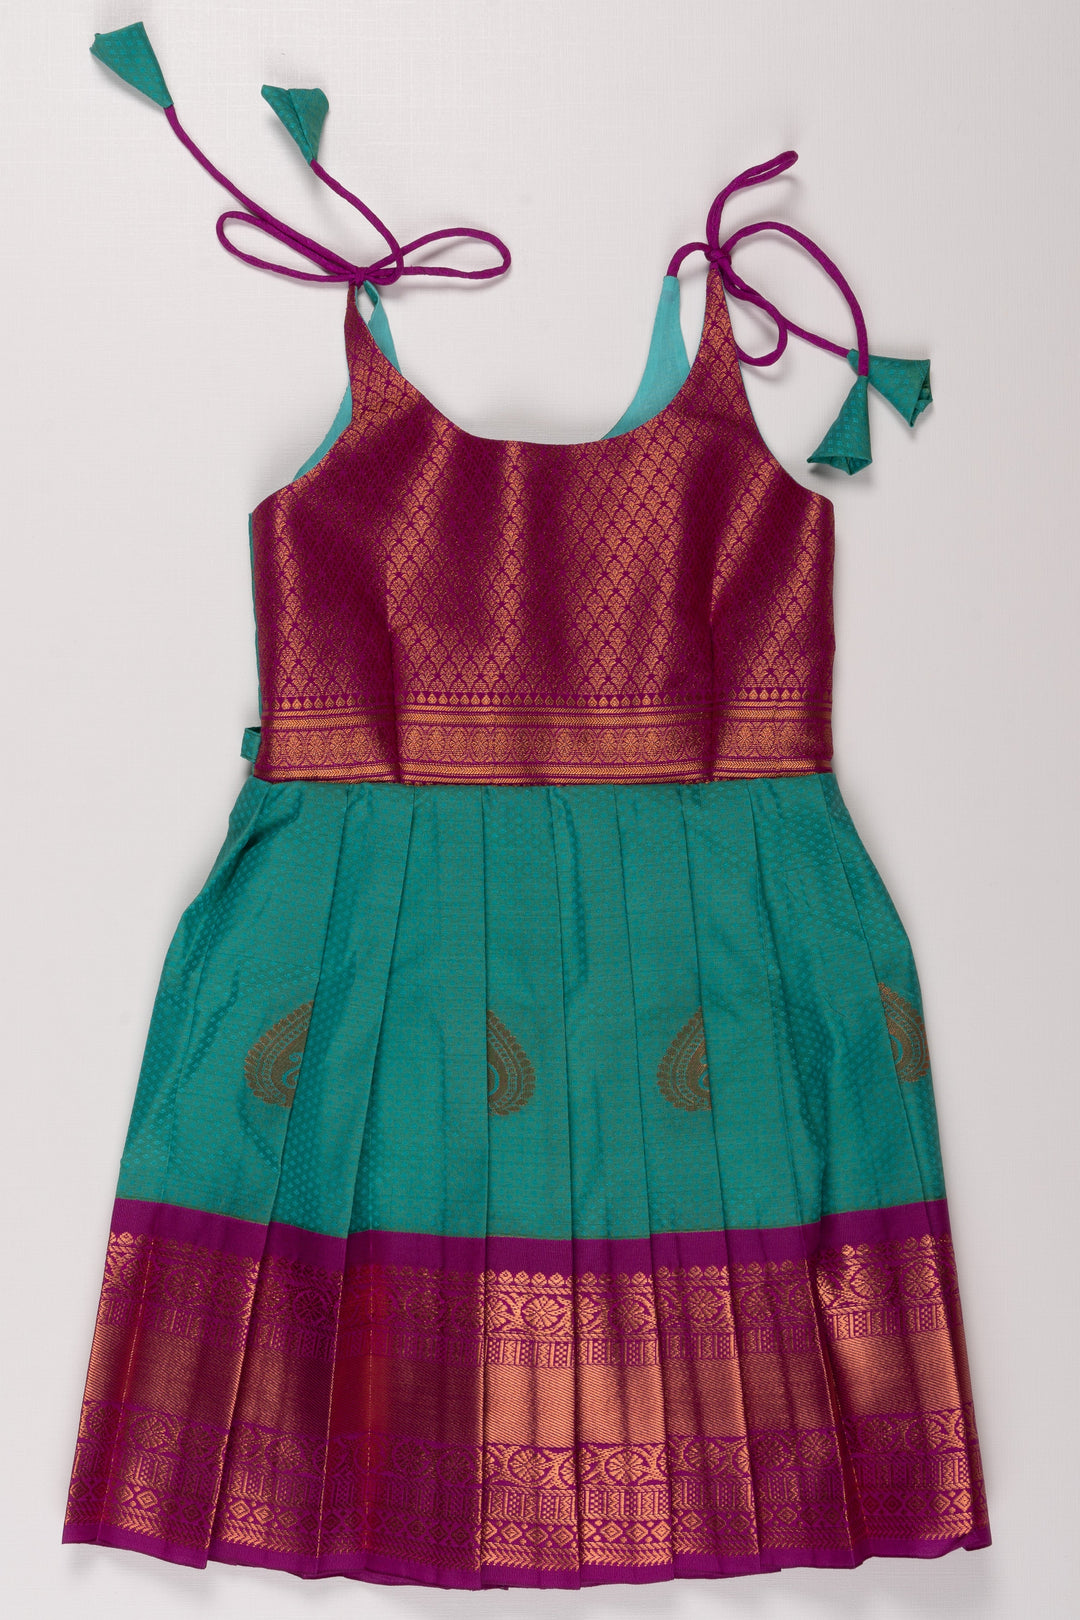 The Nesavu Tie Up Frock Magenta and Green Traditional Silk Frock with Tie-Up Detail Nesavu 20 (3Y) / Green / Style 2 T341B-20 Traditional Magenta & Green Silk Frock | Ethnic Festive Wear | The Nesavu